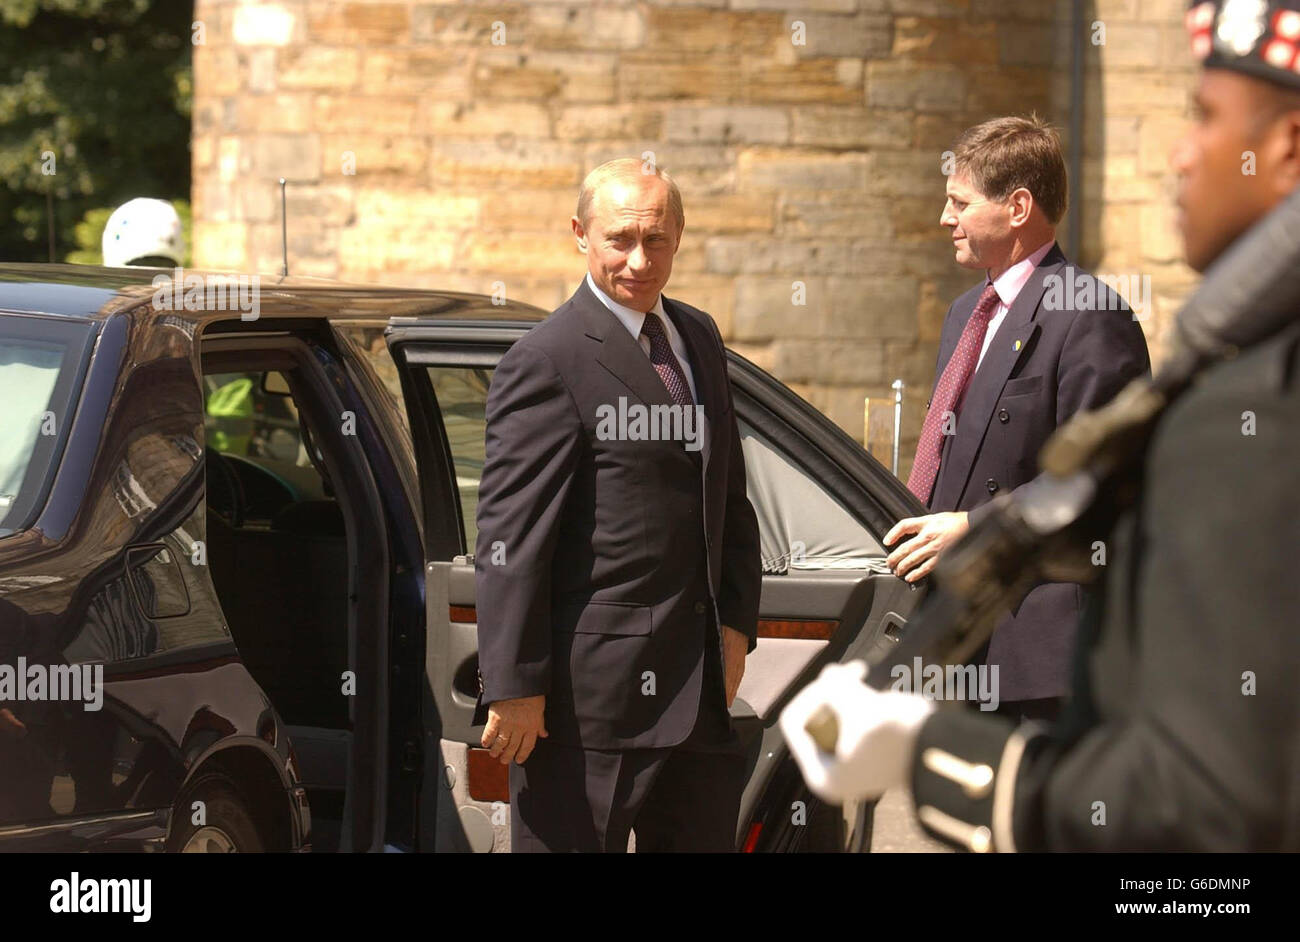 Russian President Vladimir Putin arrives at the Palace of Holyrood House in Edinburgh, for a private lunch. As President Putin's entourage passed through the gates a protester threw himself in front of the President's car. * The demonstrator, who was shouting slogans attacking the war in Chechnya, was wrestled to the ground by police officers and taken away for questioning. Stock Photo